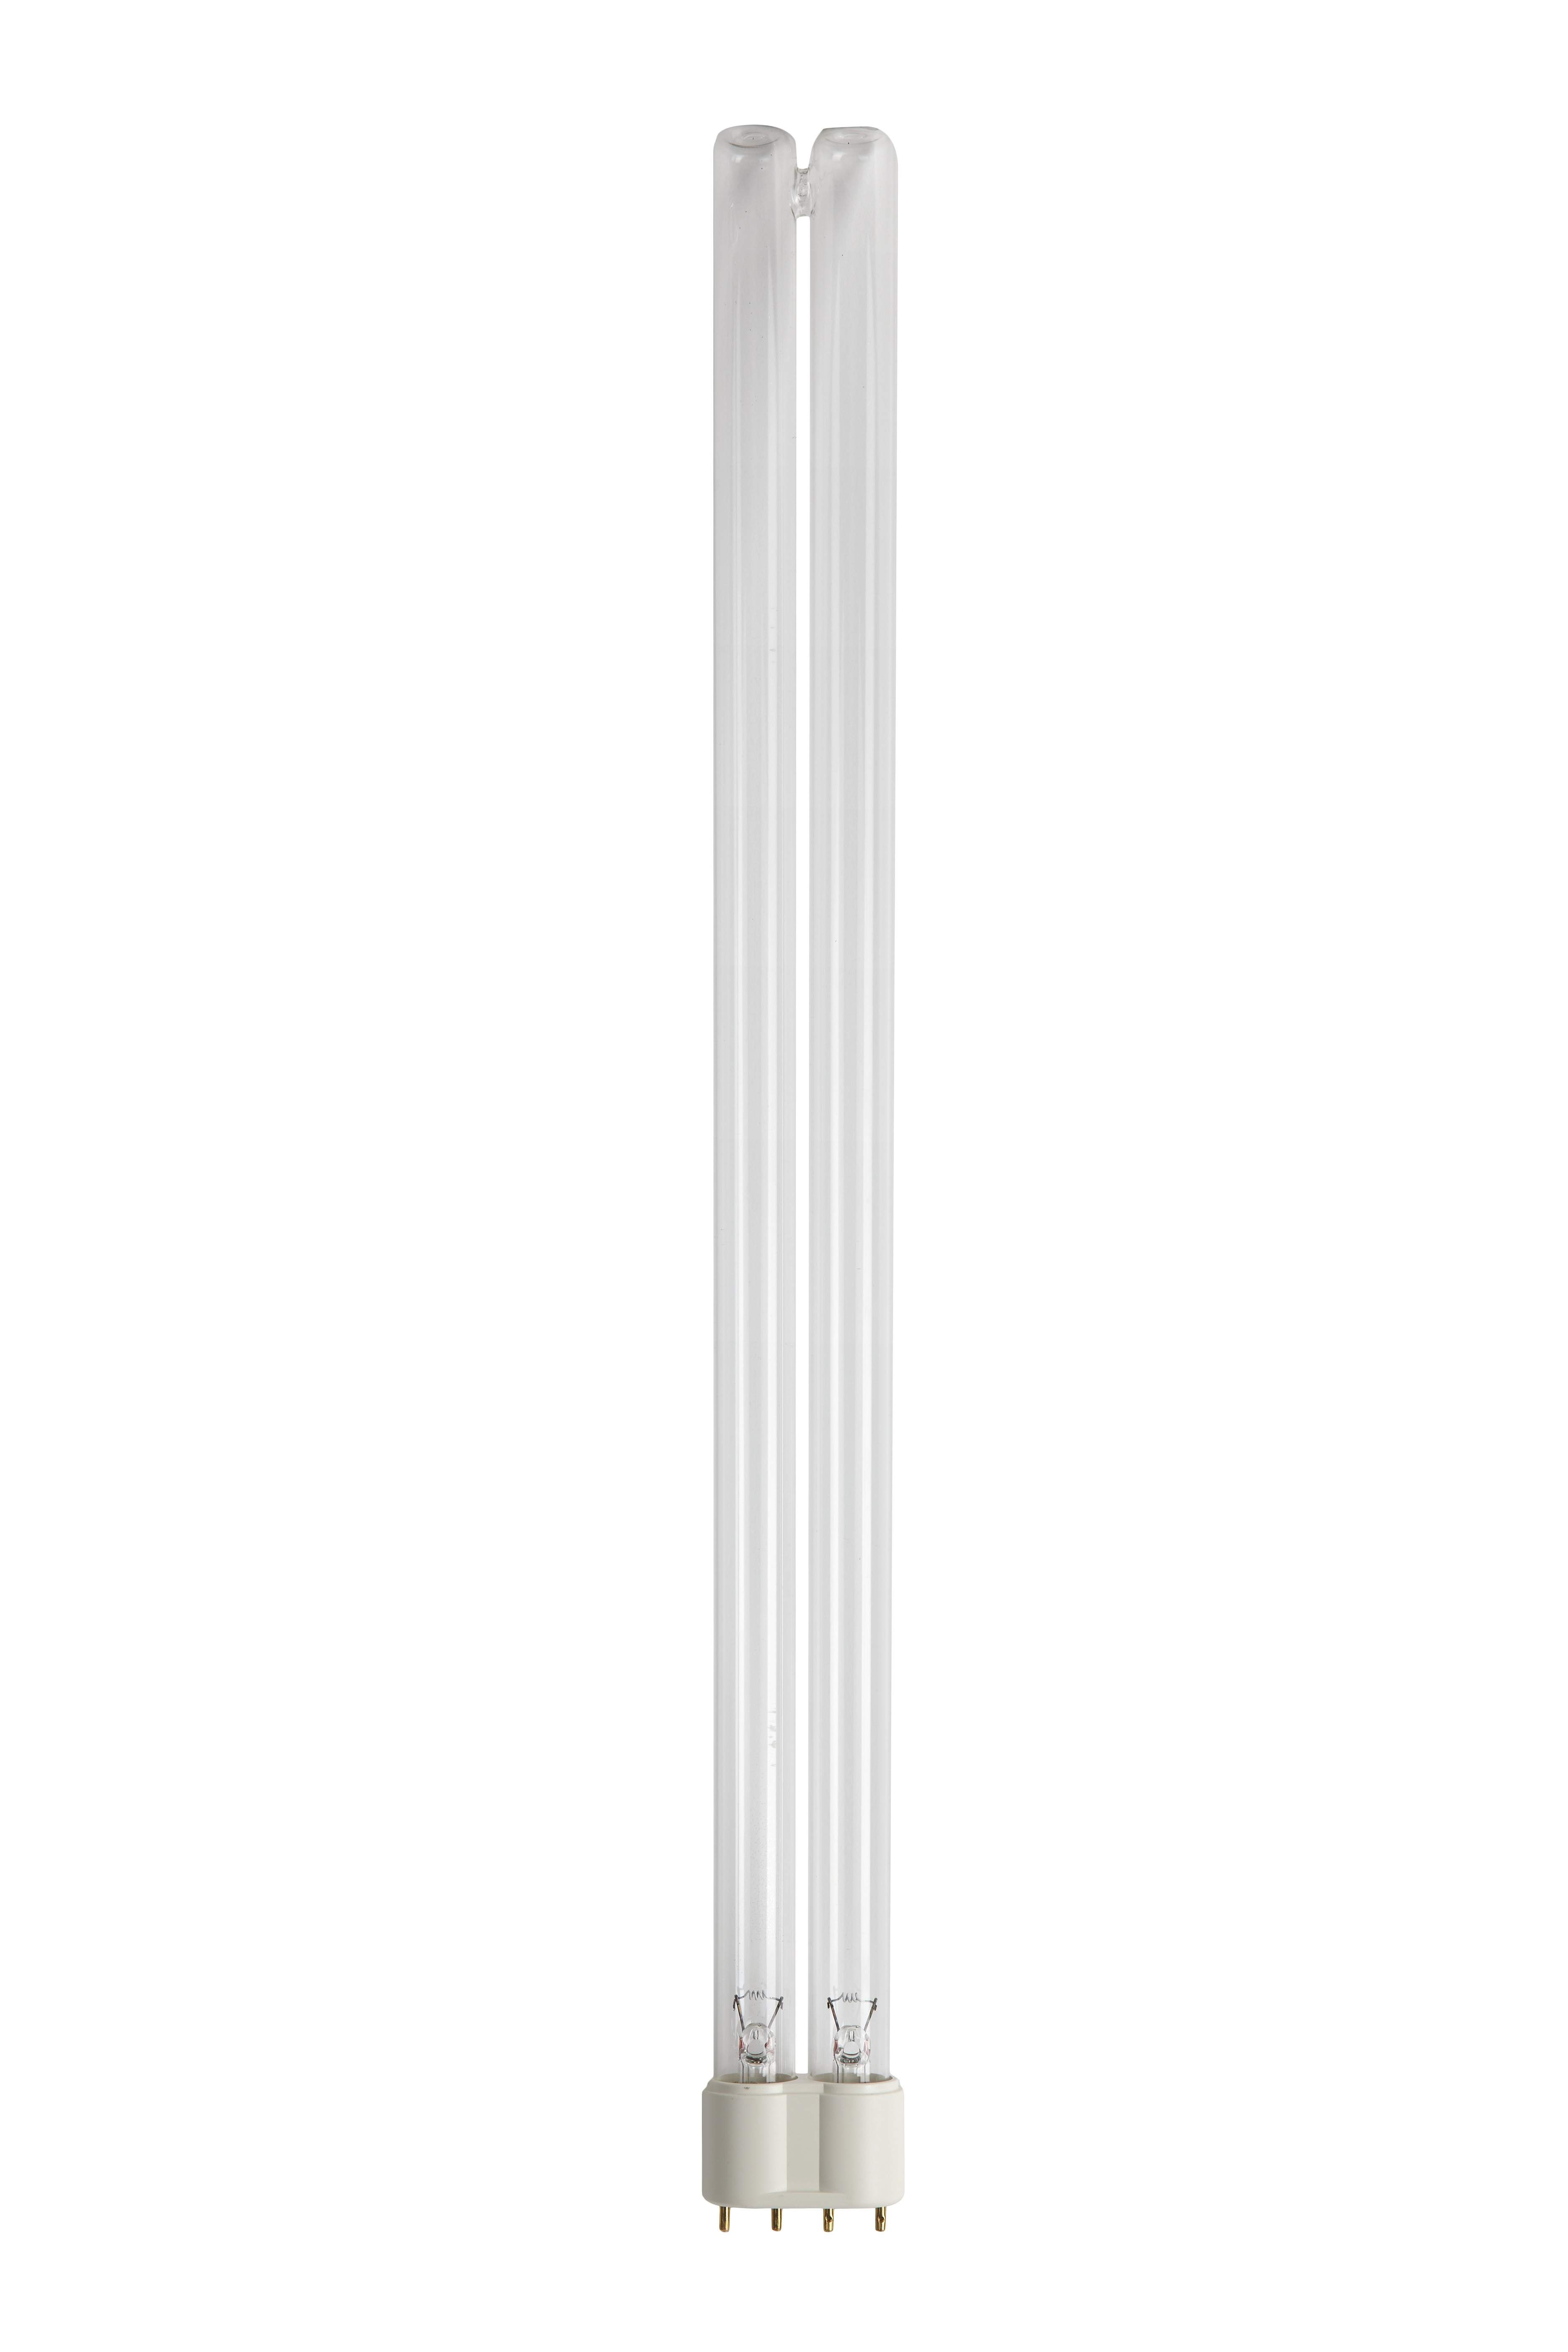  36 W single-ended UVC lamp.